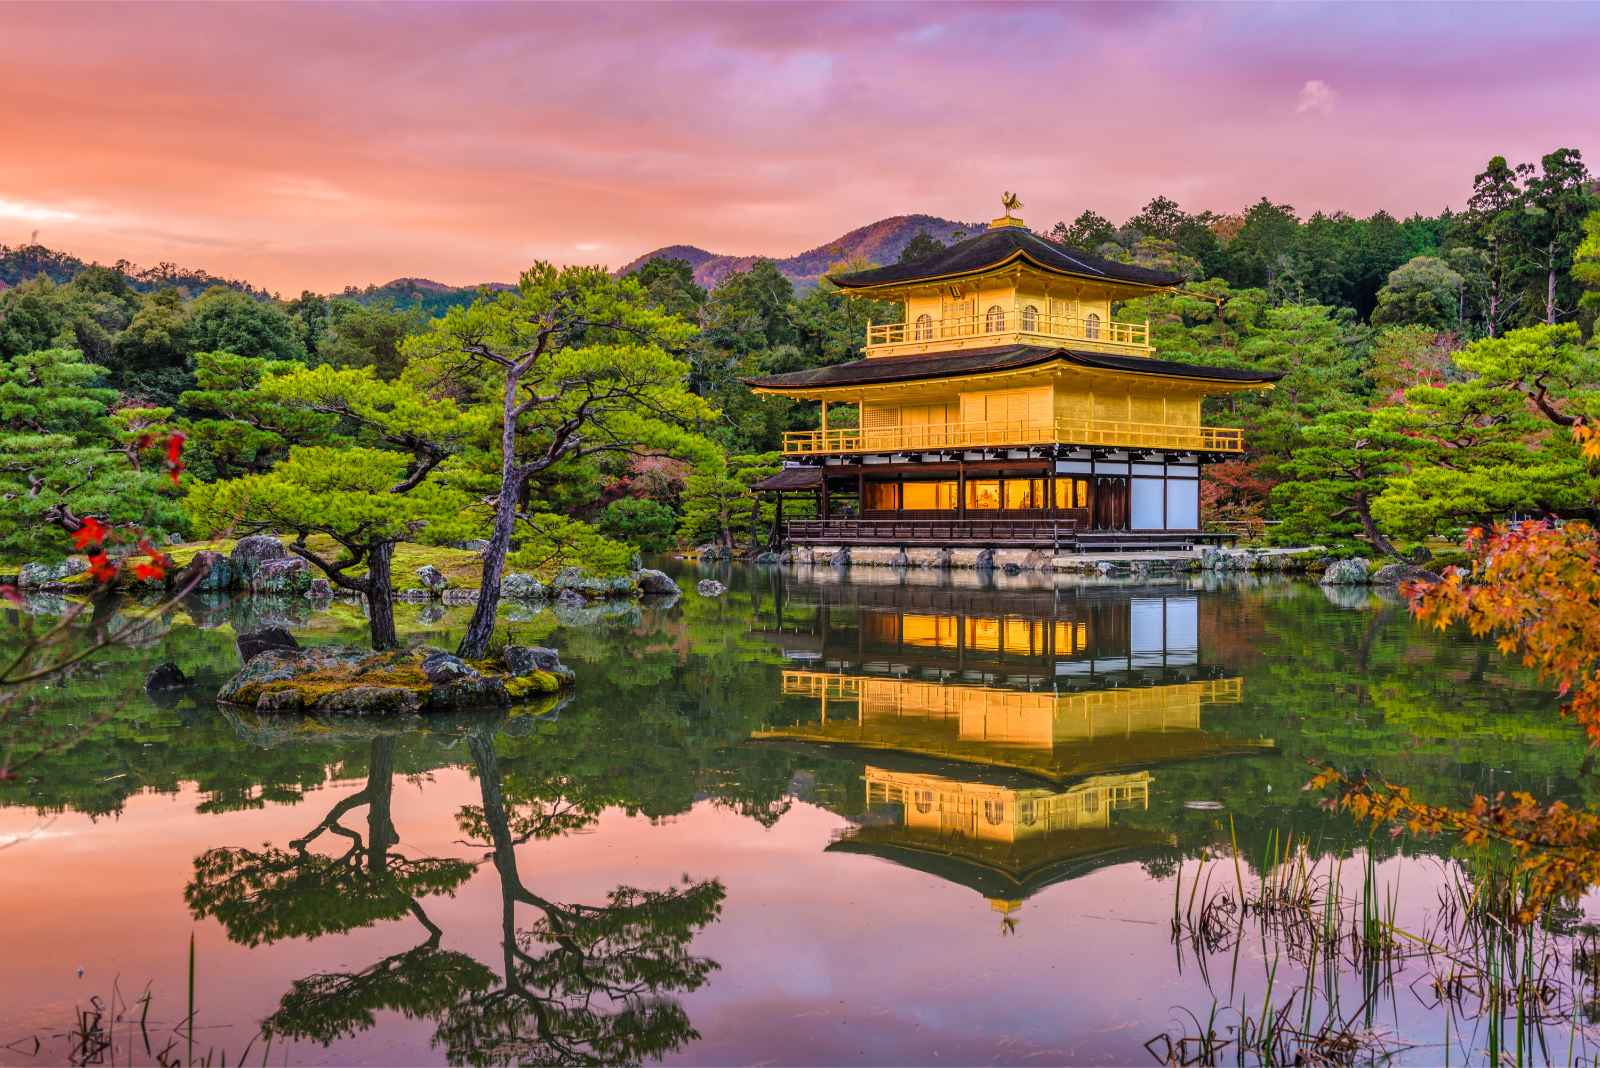 Top things to do in Osaka day trip to Kyoto